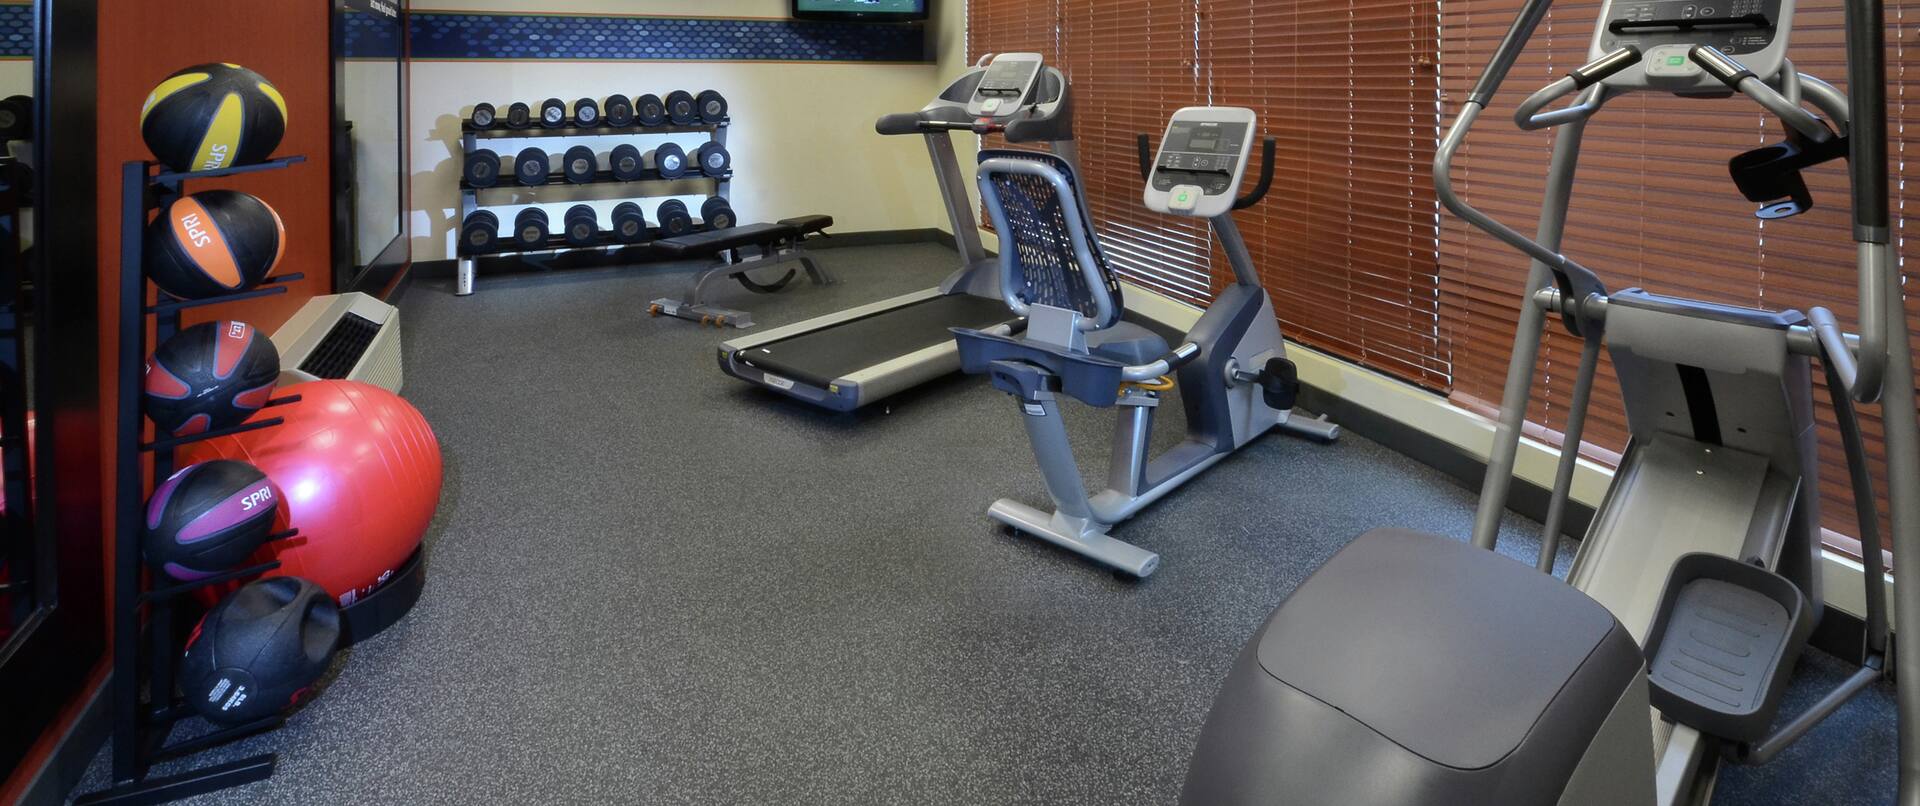 Fitness Center With TV, Weight Bench, Cardio Equipment, Weight Balls, Red Stability Ball, Mirror, and Free Weights 